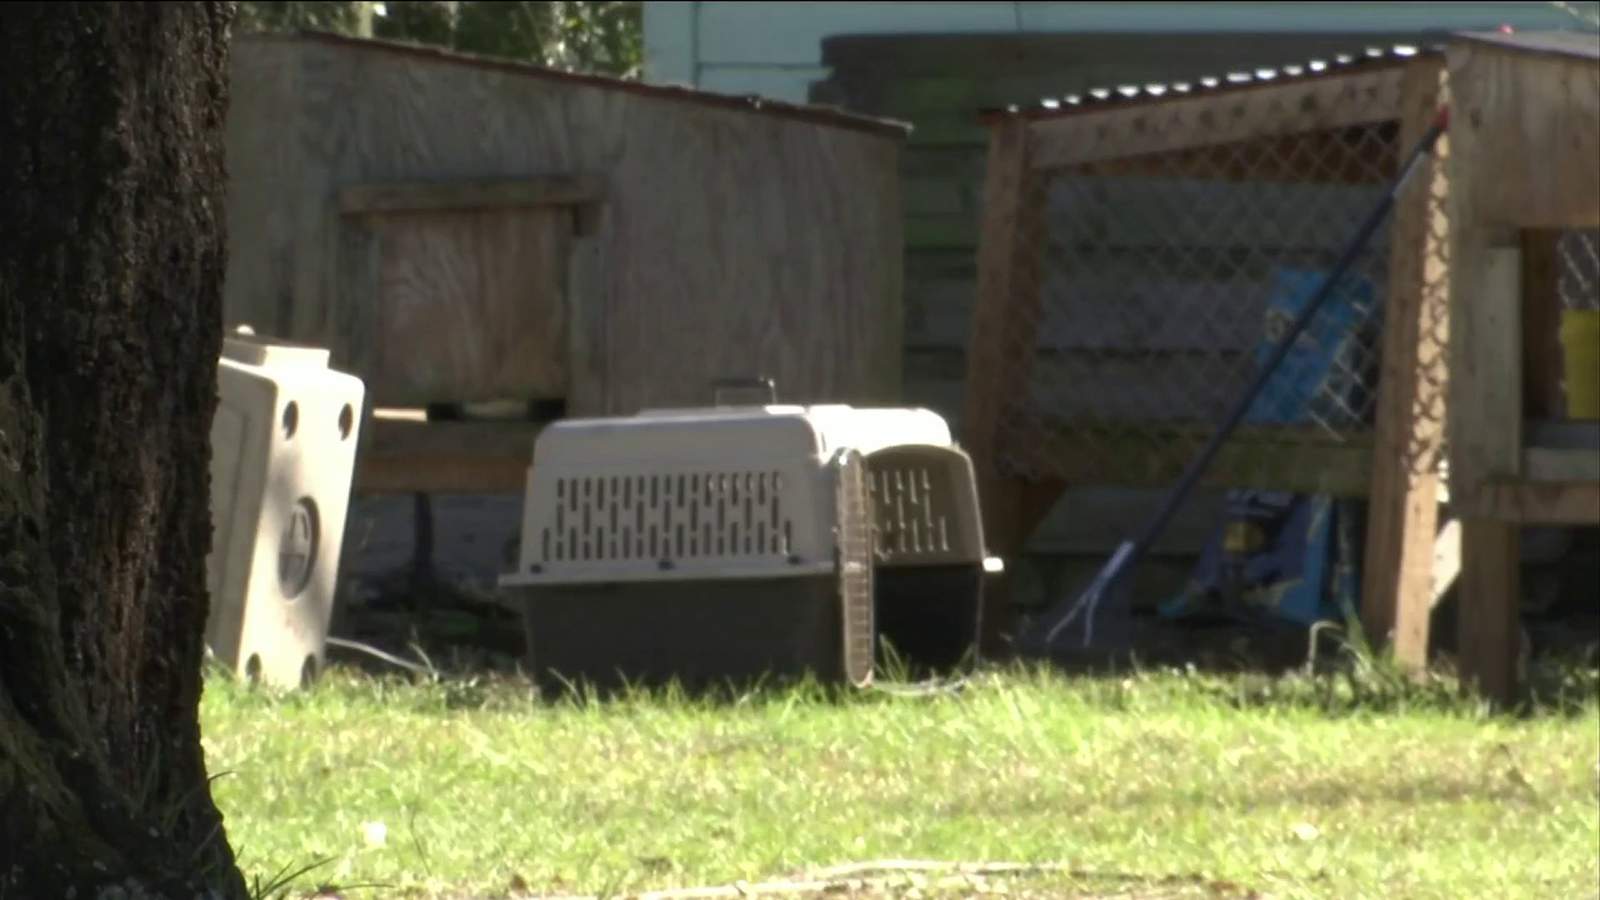 Neighbors suspect Westside property was used for dogfighting